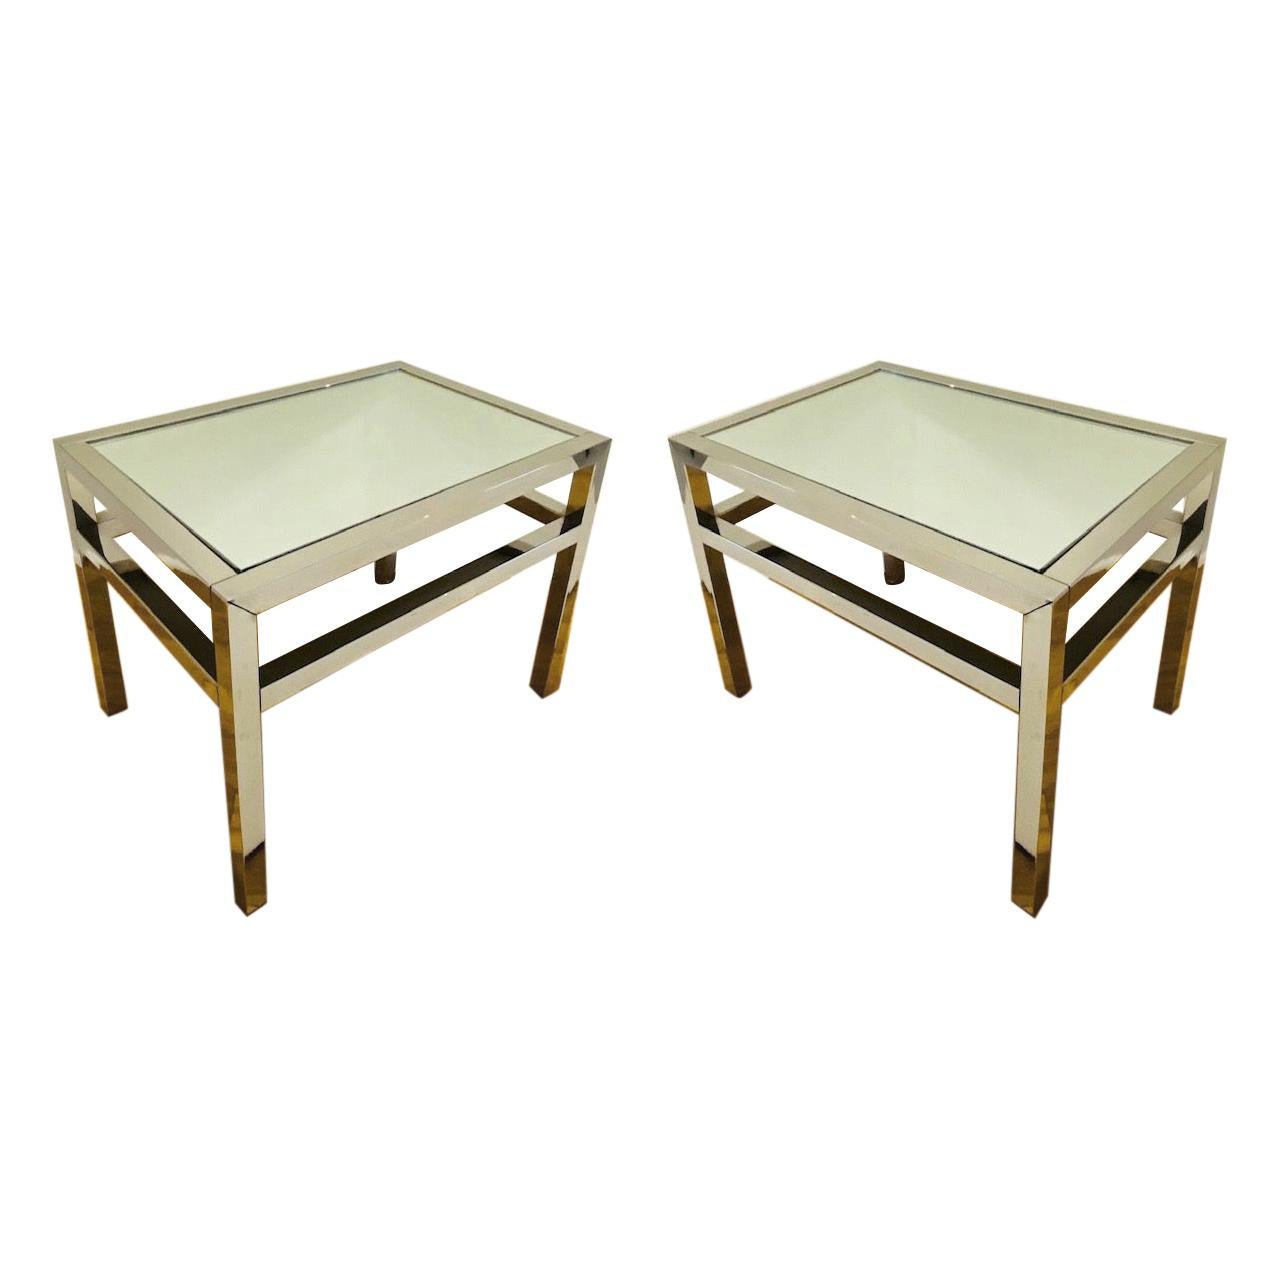 Pair of Chrome and Mirrored Side Tables in the style of Milo Baughman, c. 1970's